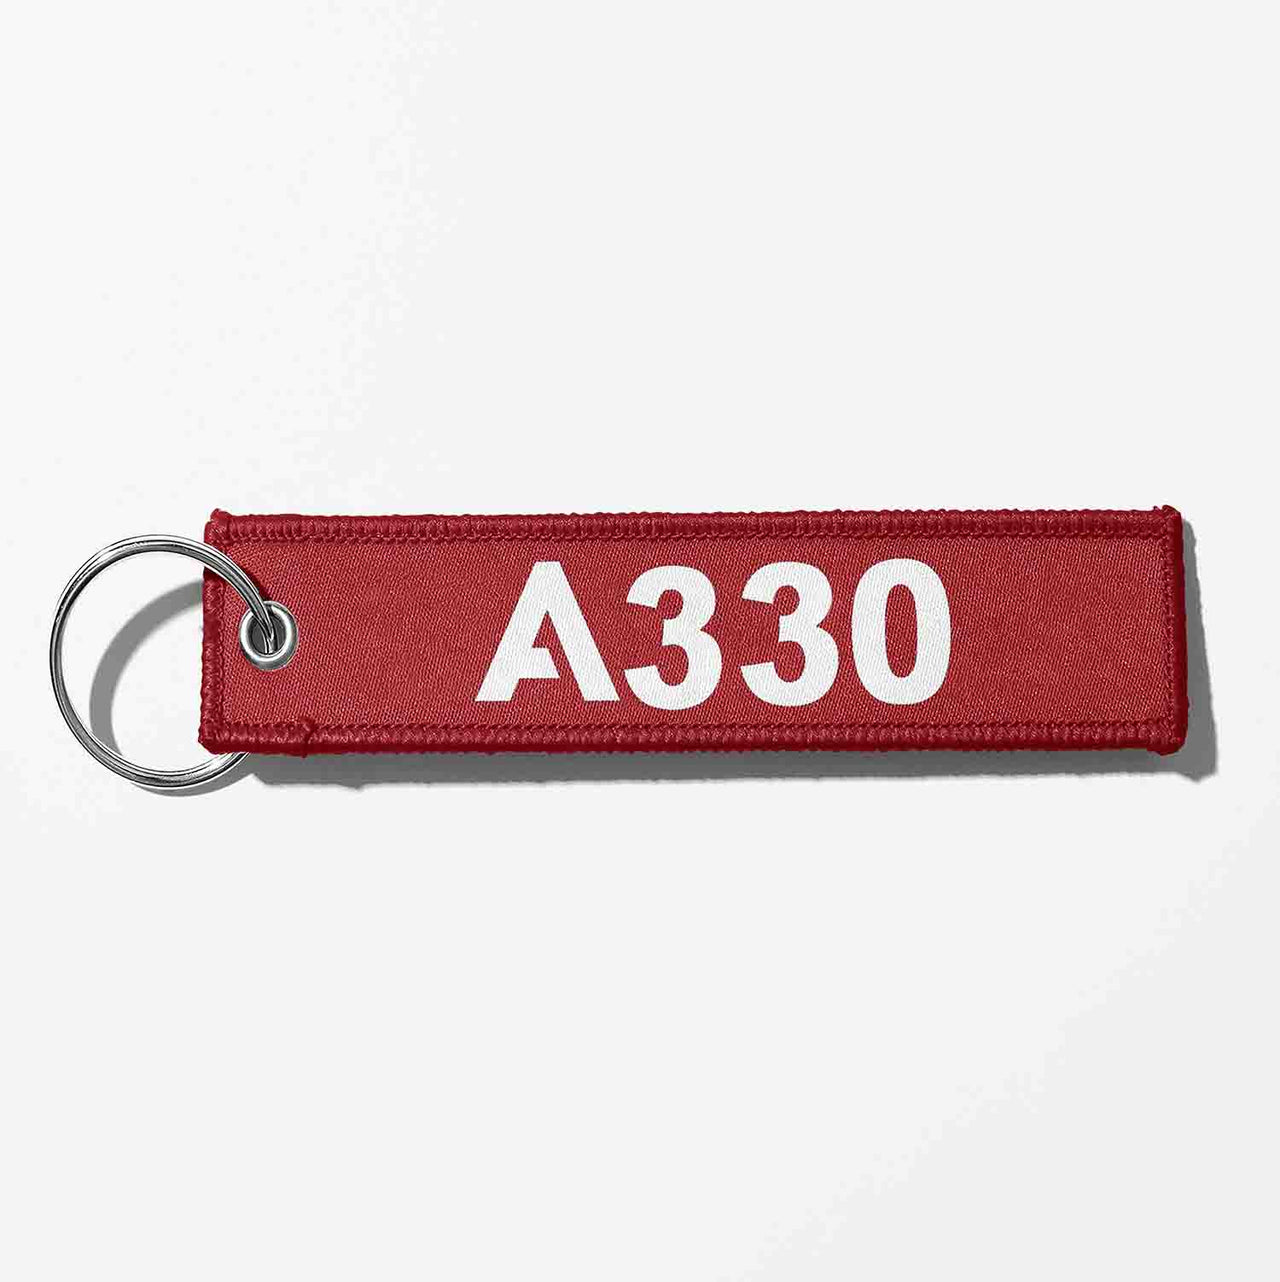 A330 Flat Text Designed Key Chains